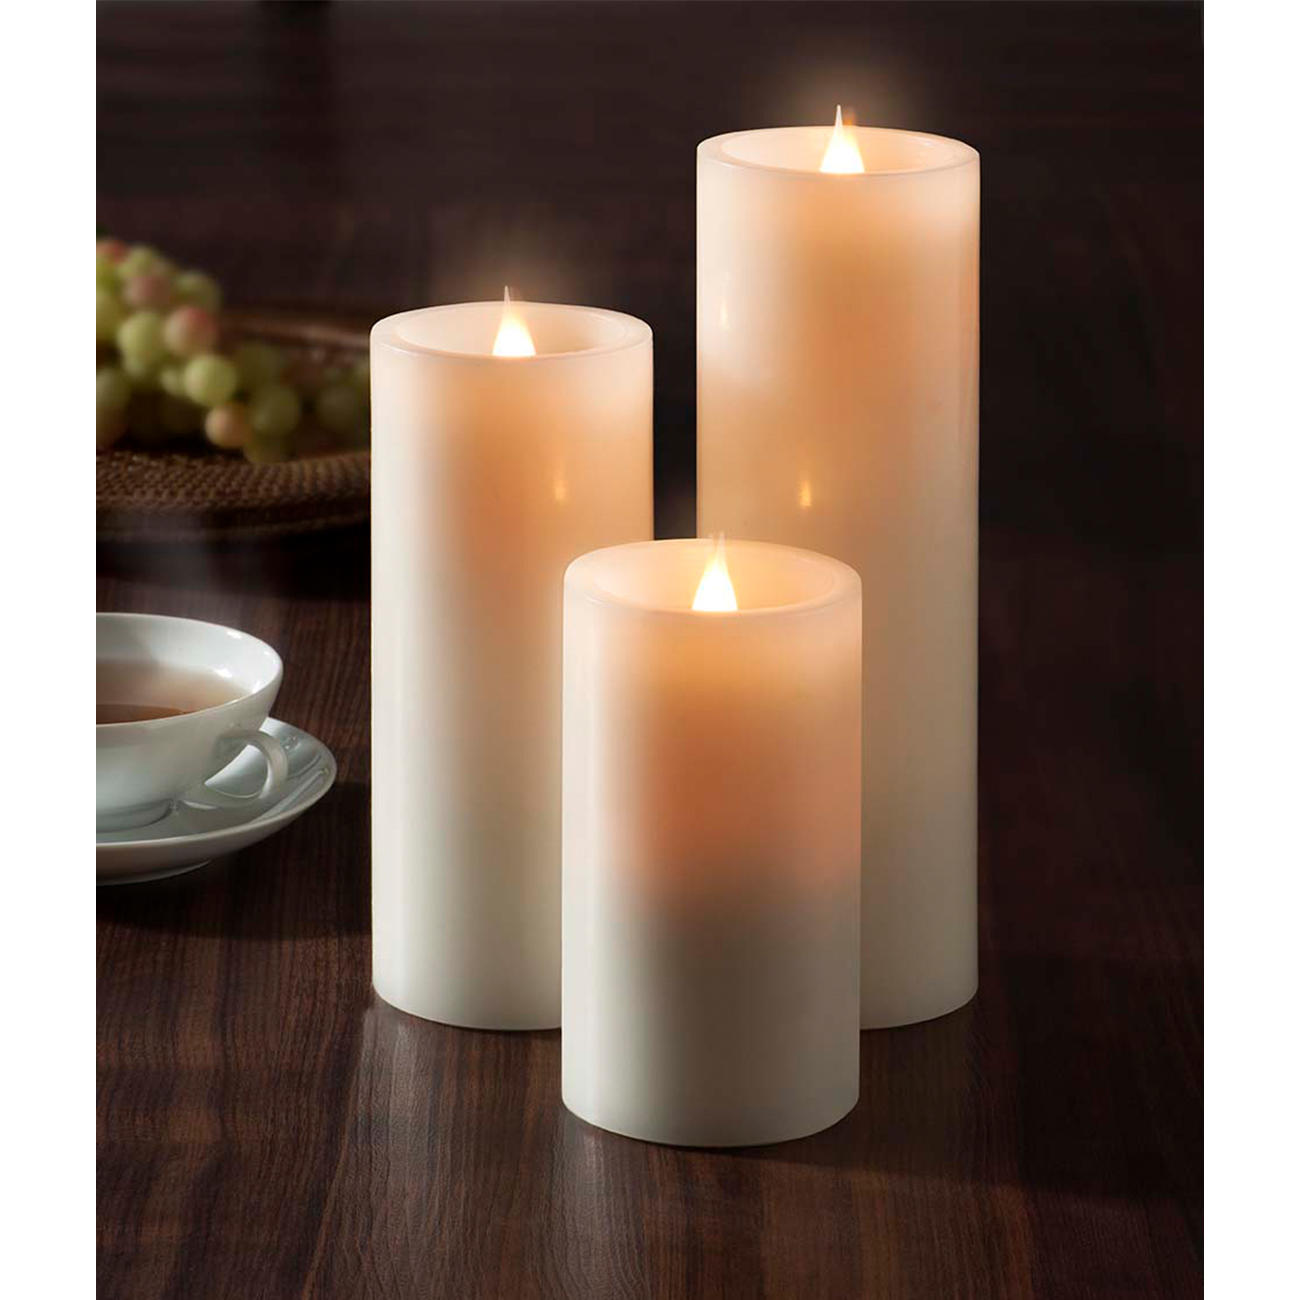 LED Candle “3D Flame” | 3-year product guarantee1300 x 1300